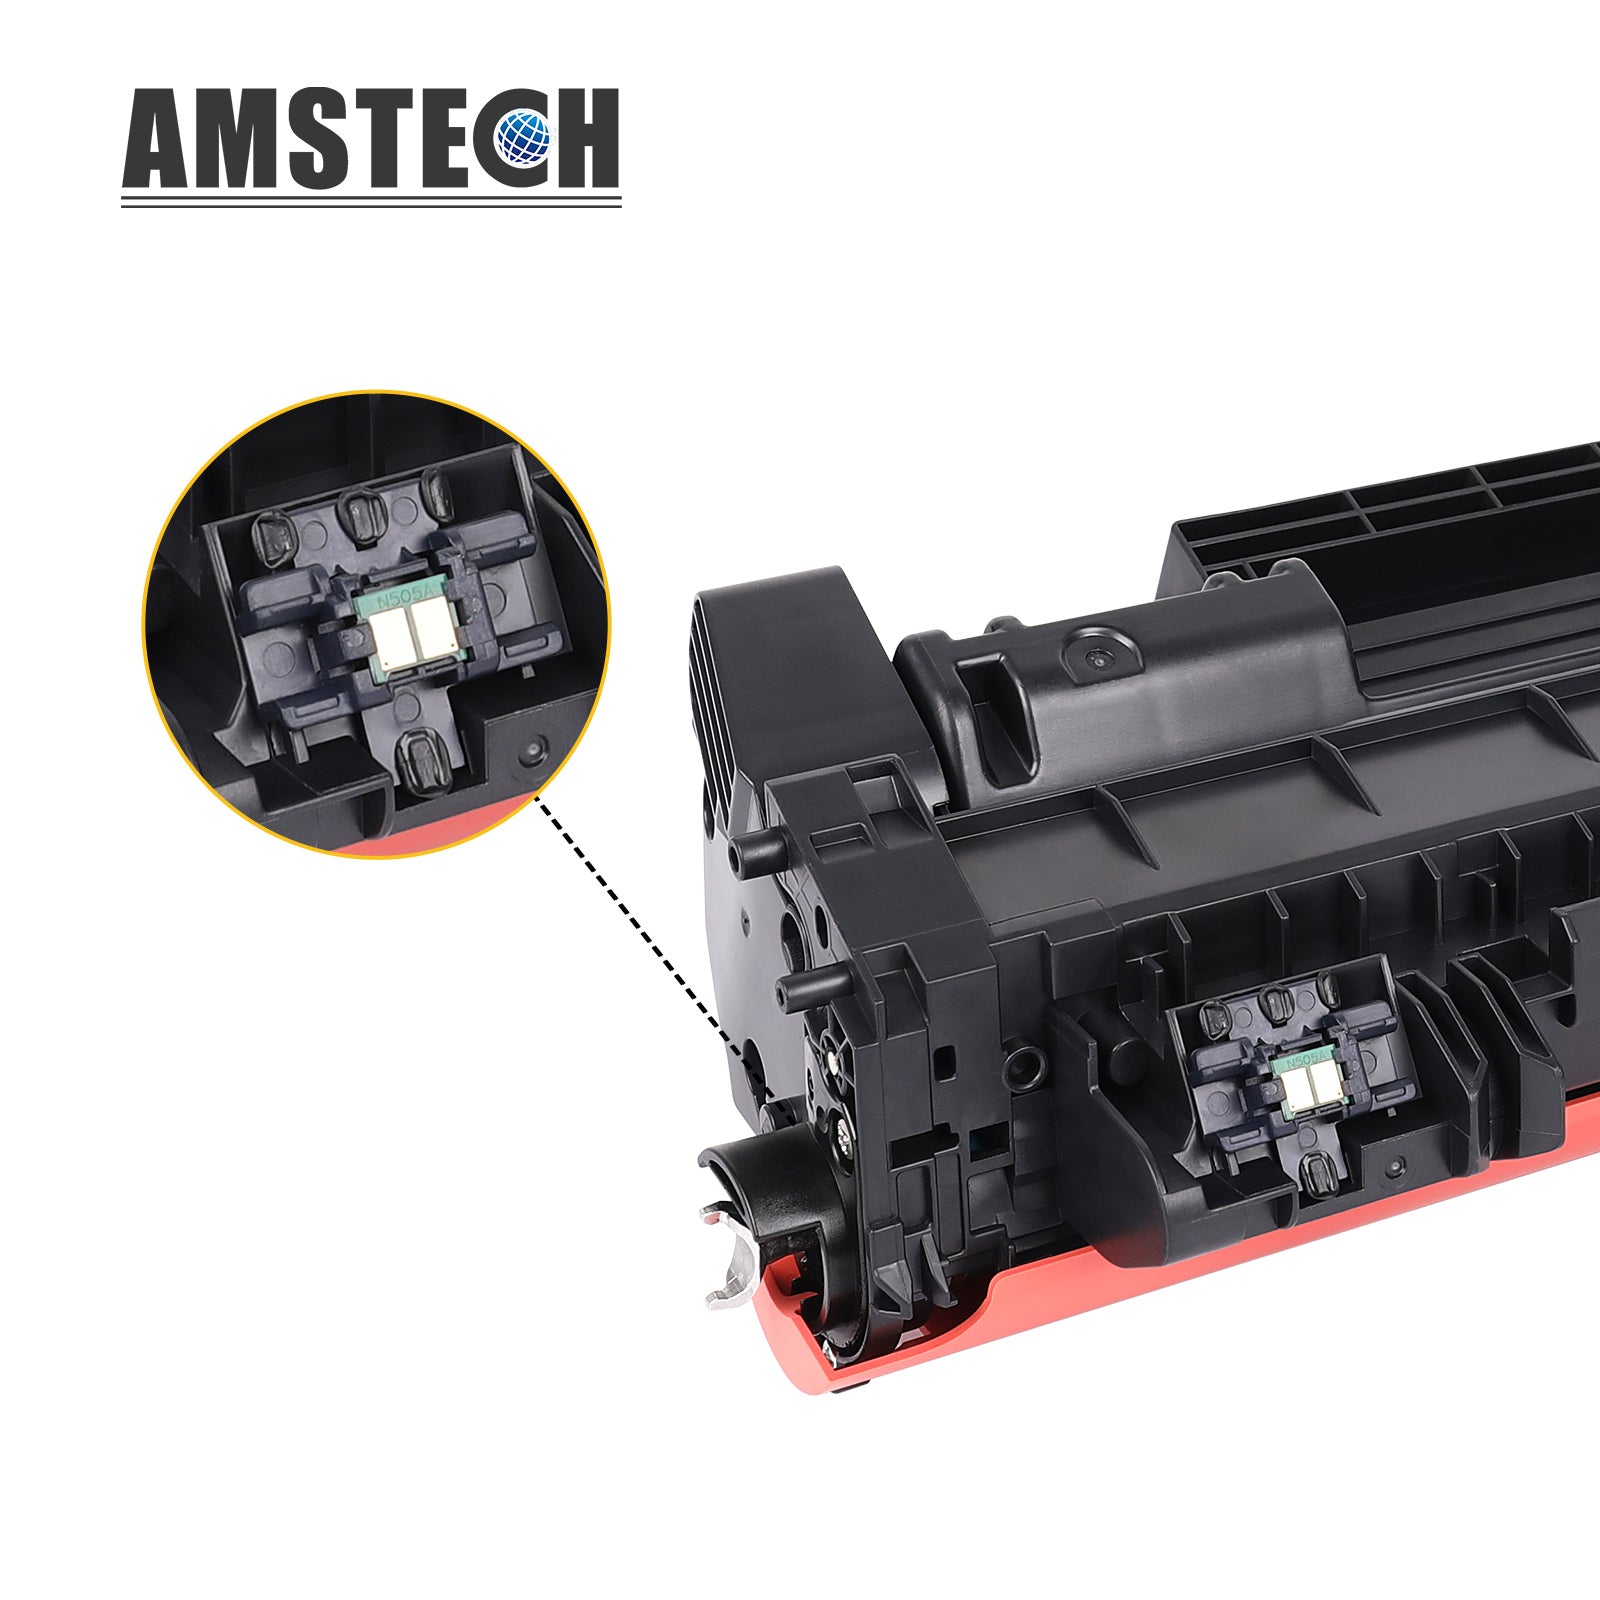 Amstech 5-Pack Compatible Toner for HP 80A CF280A Laserjet Pro 400 M401a M401d M401n M401dn M401dne M401dw Laserjet Pro 400 MFP M425DN M425dw Printer High Yield(Black)